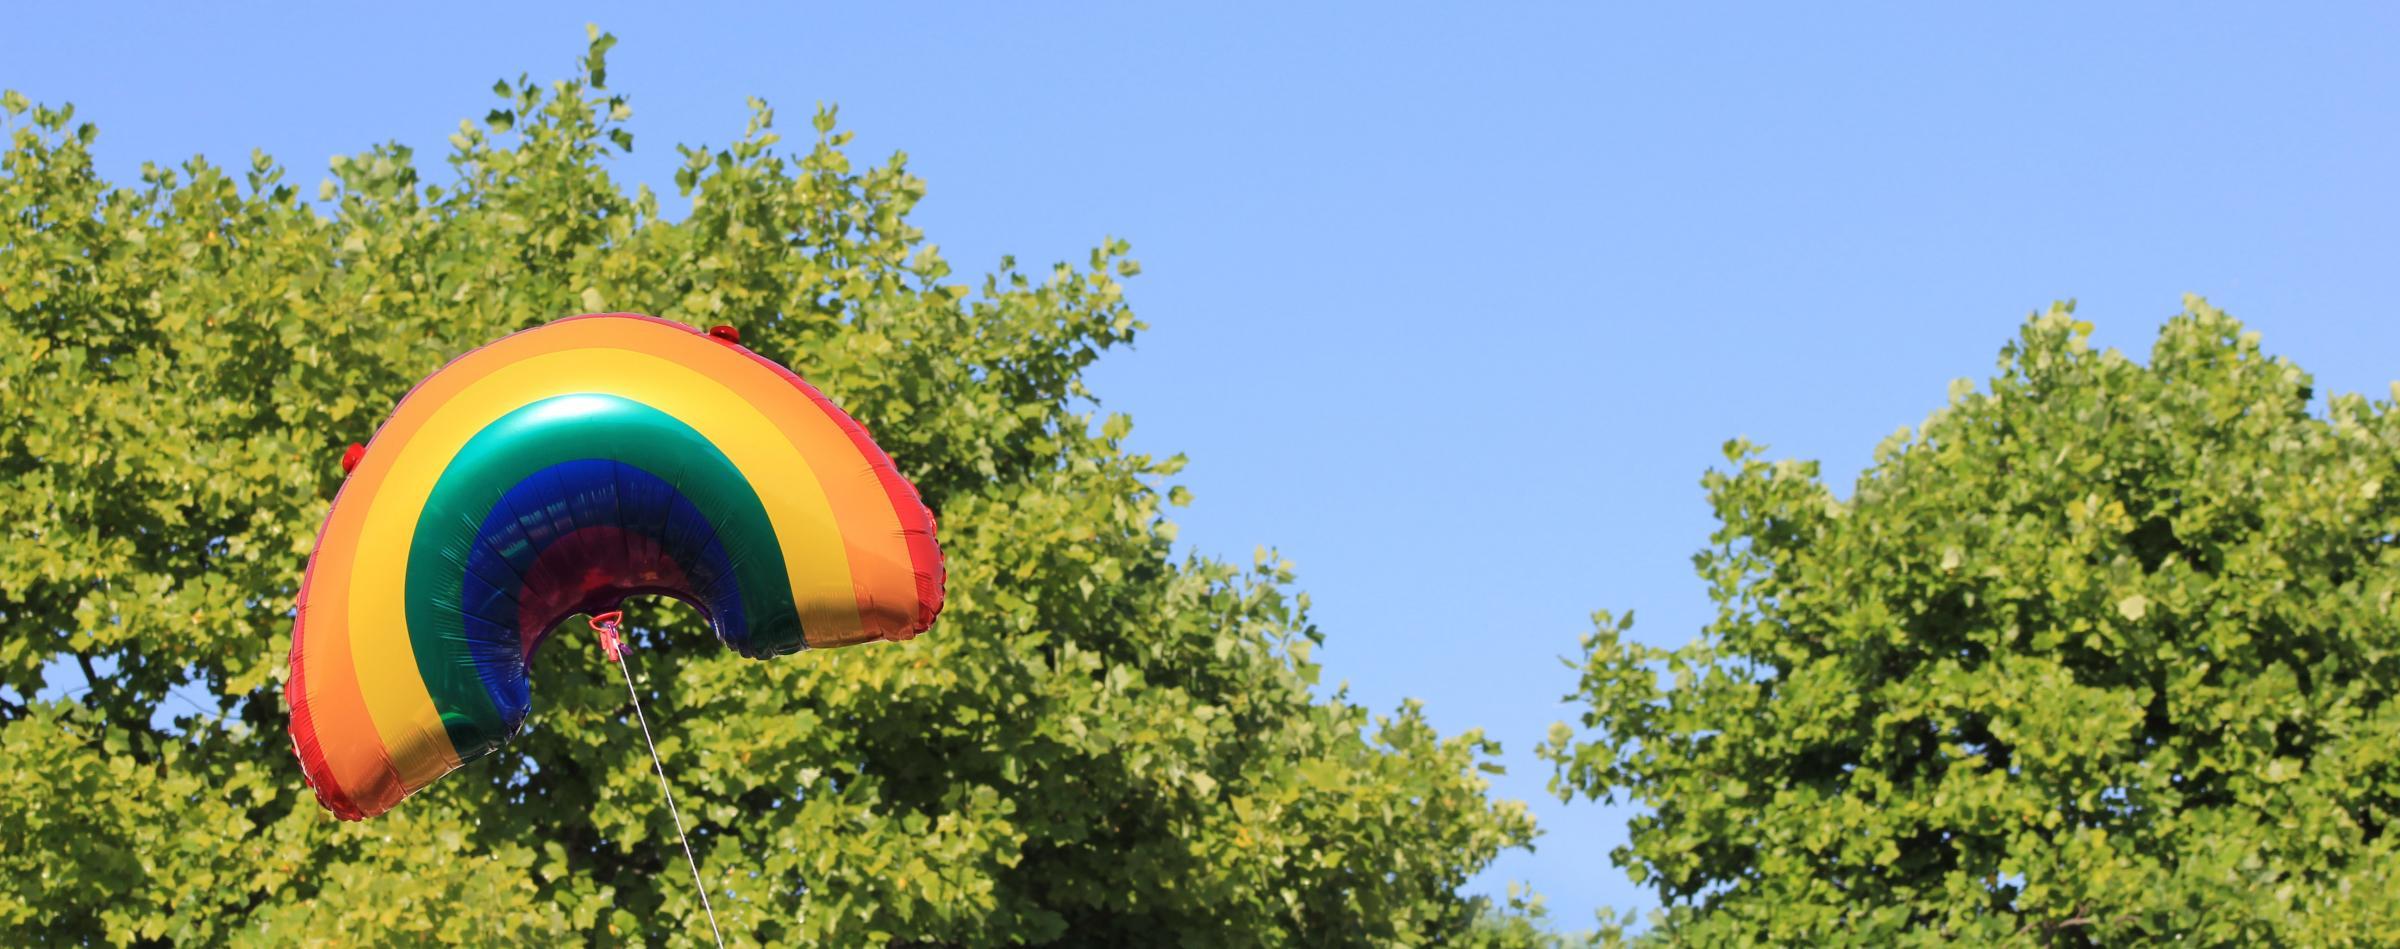 Image of a rainbow shaped balloon floating in front of some trees